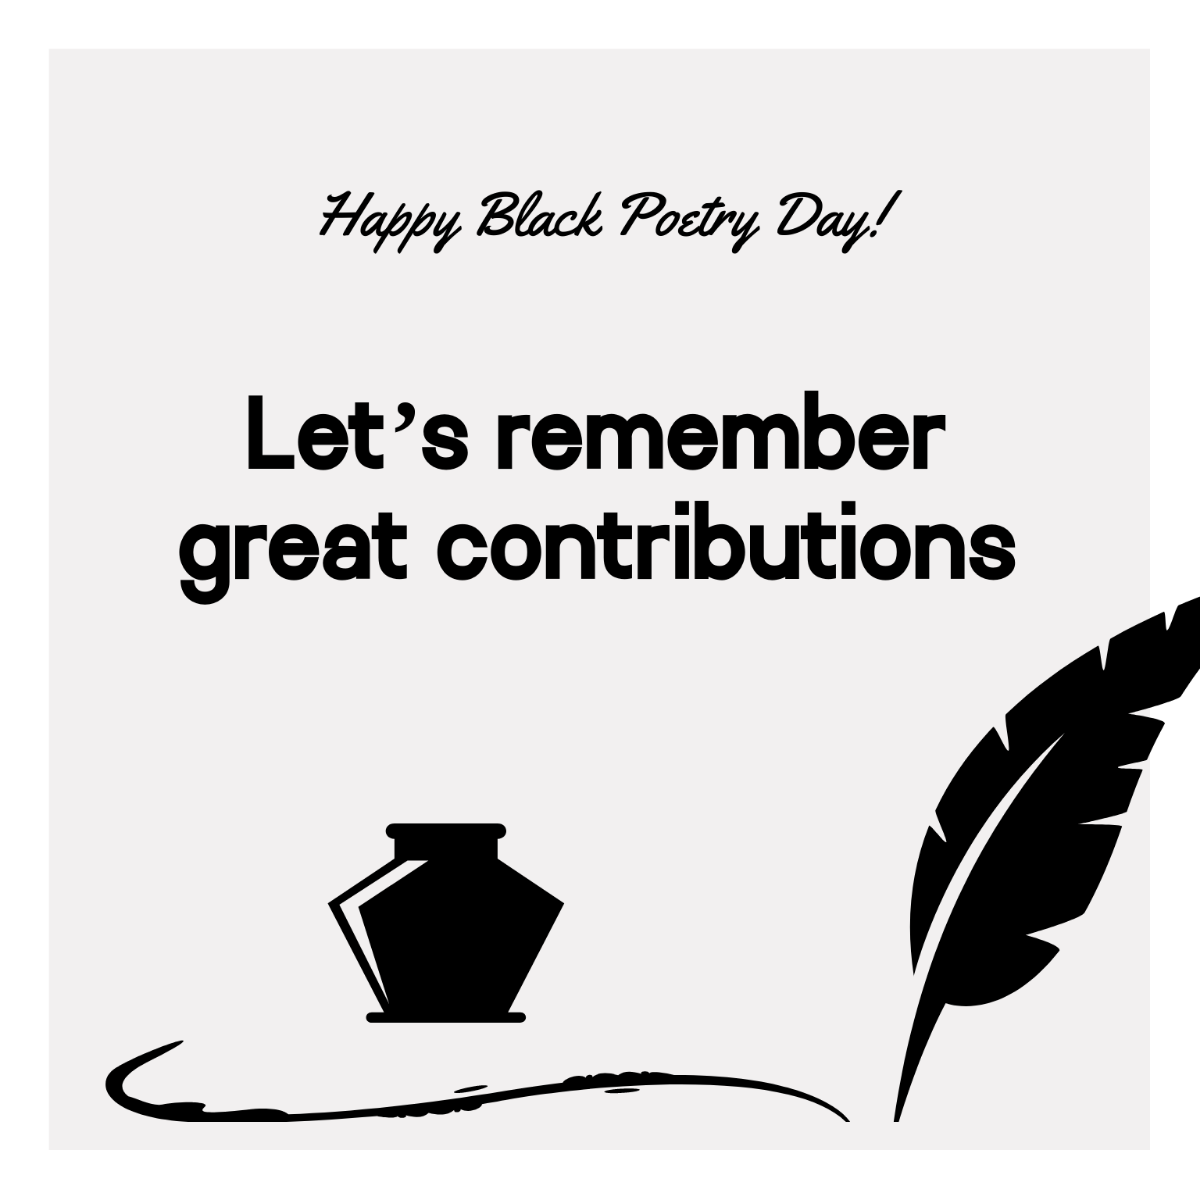 Black Poetry Day Greeting Card Vector